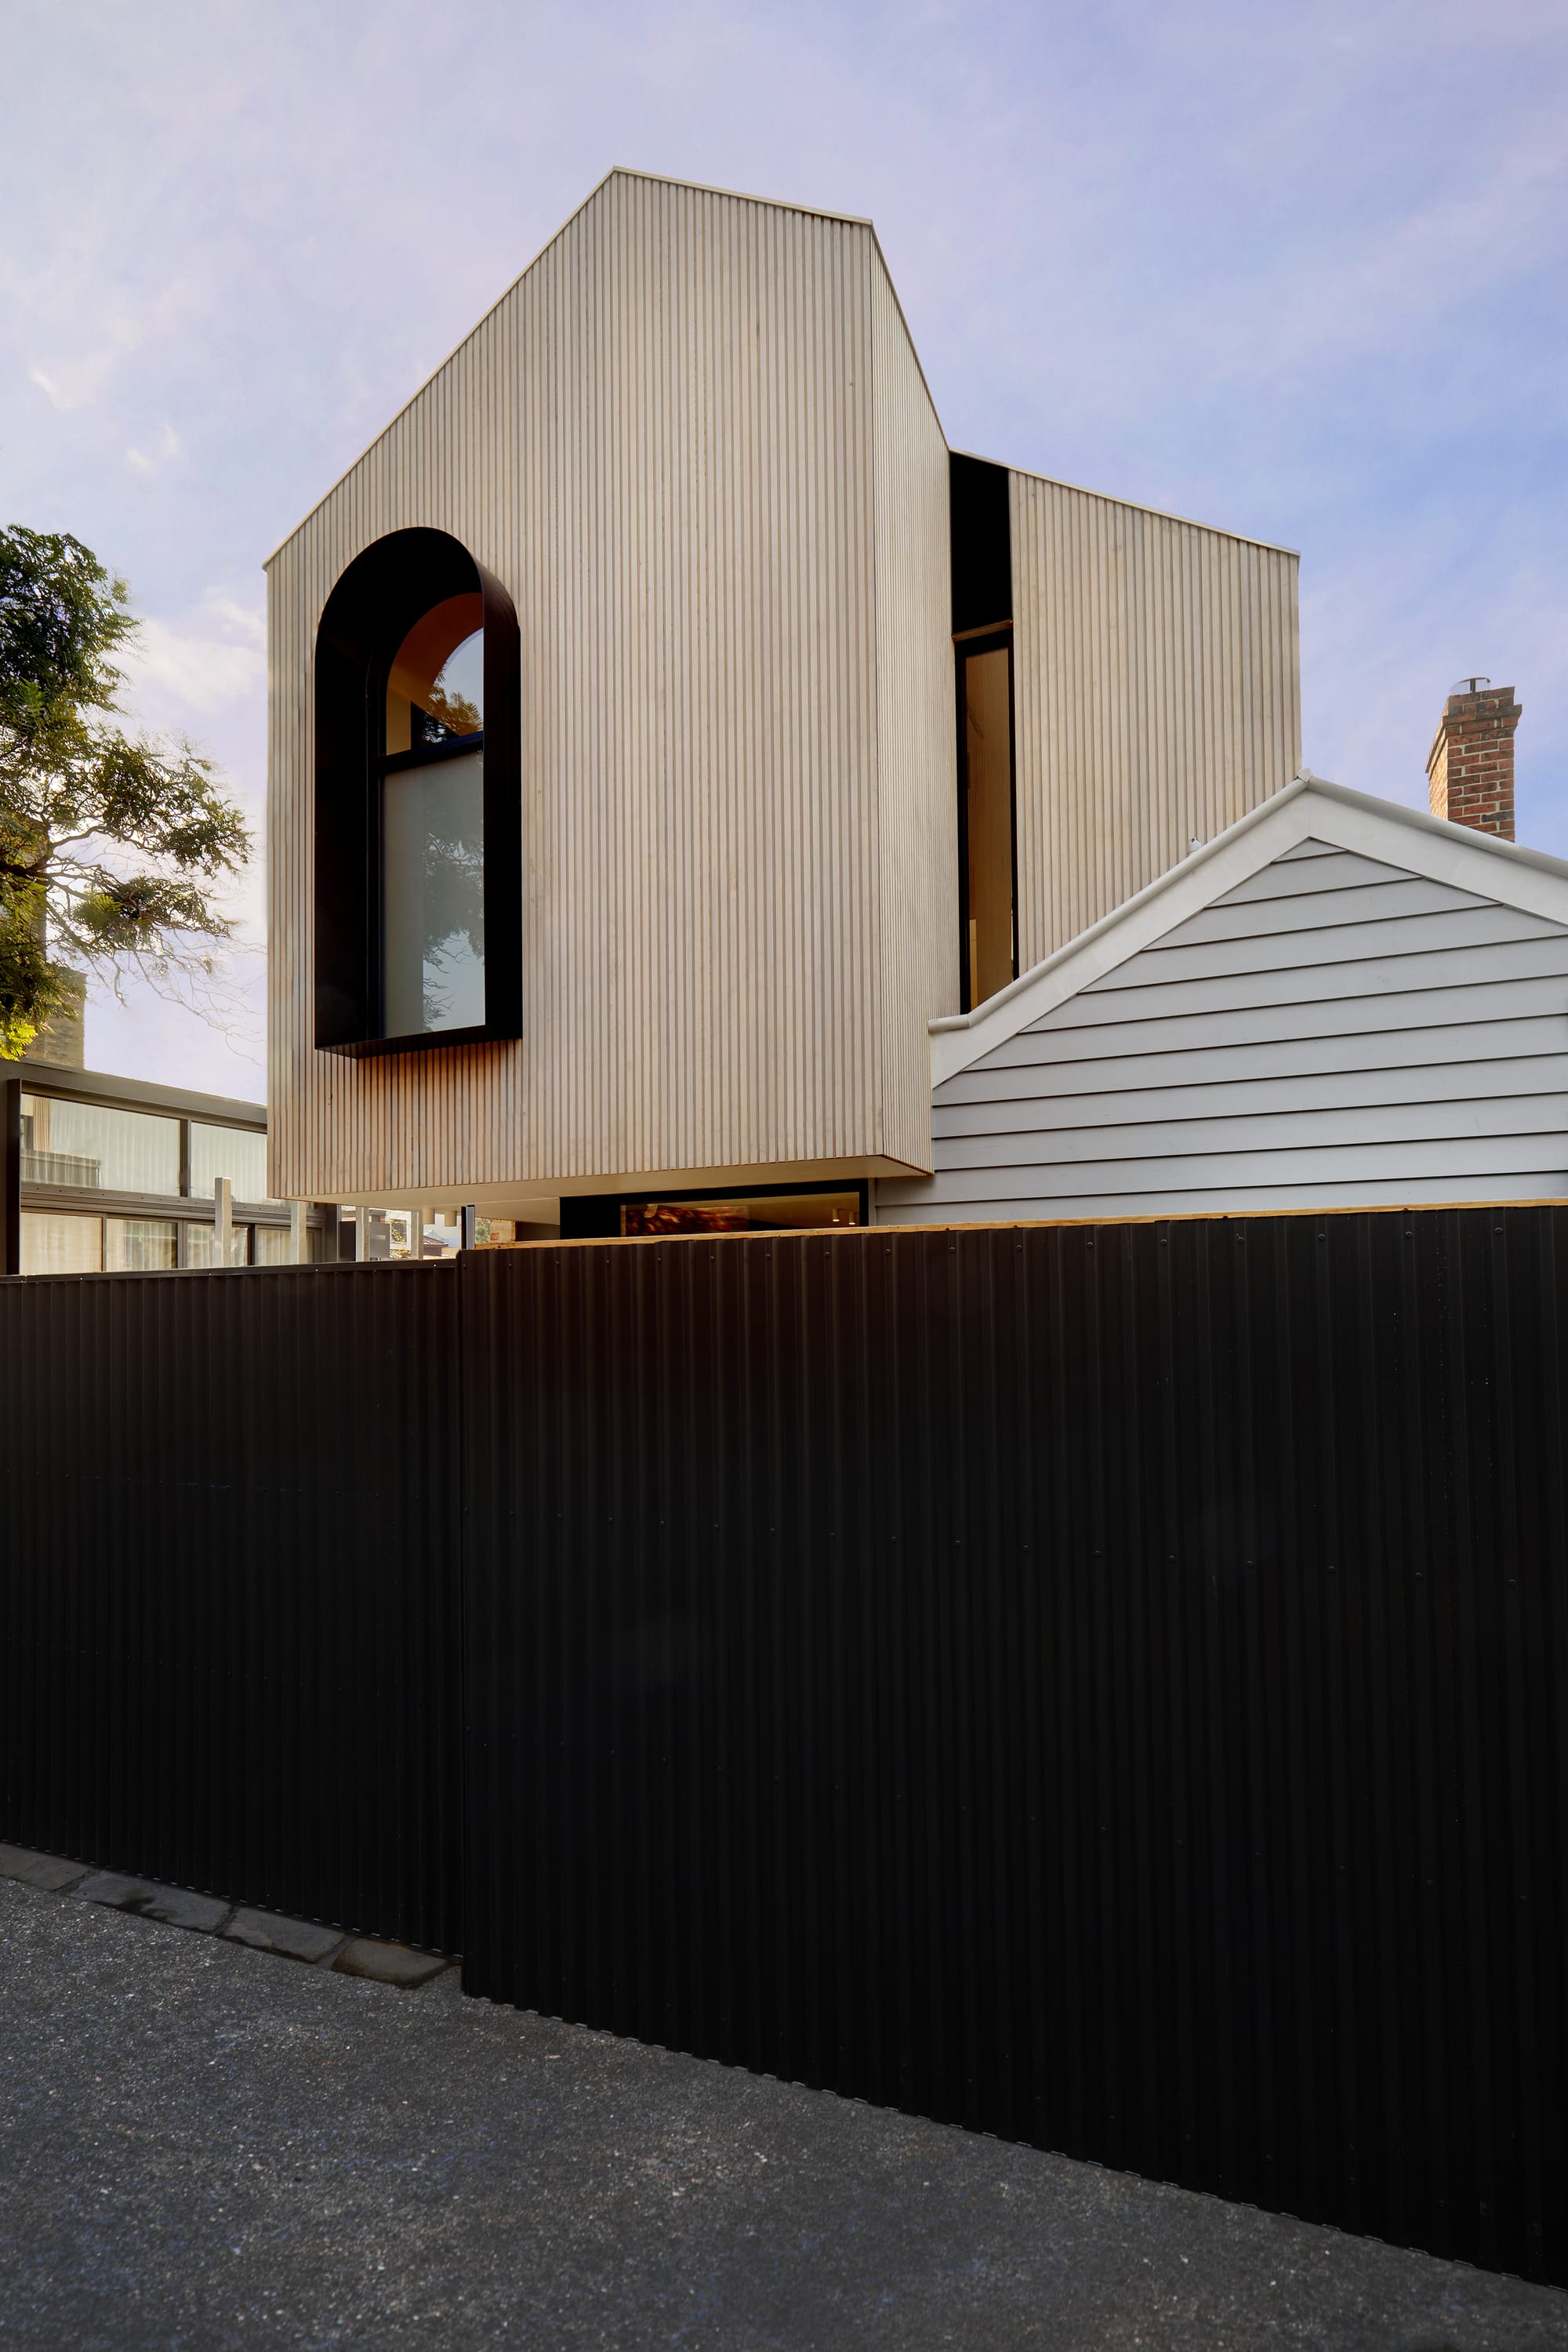 The Full Monty by FYC Architects. Photography by Stephanie Rooney. Exterior facade of home with timber clad second storey with gabled roof and bold, black window frame. Black fence encloses ground floor from footpath. 